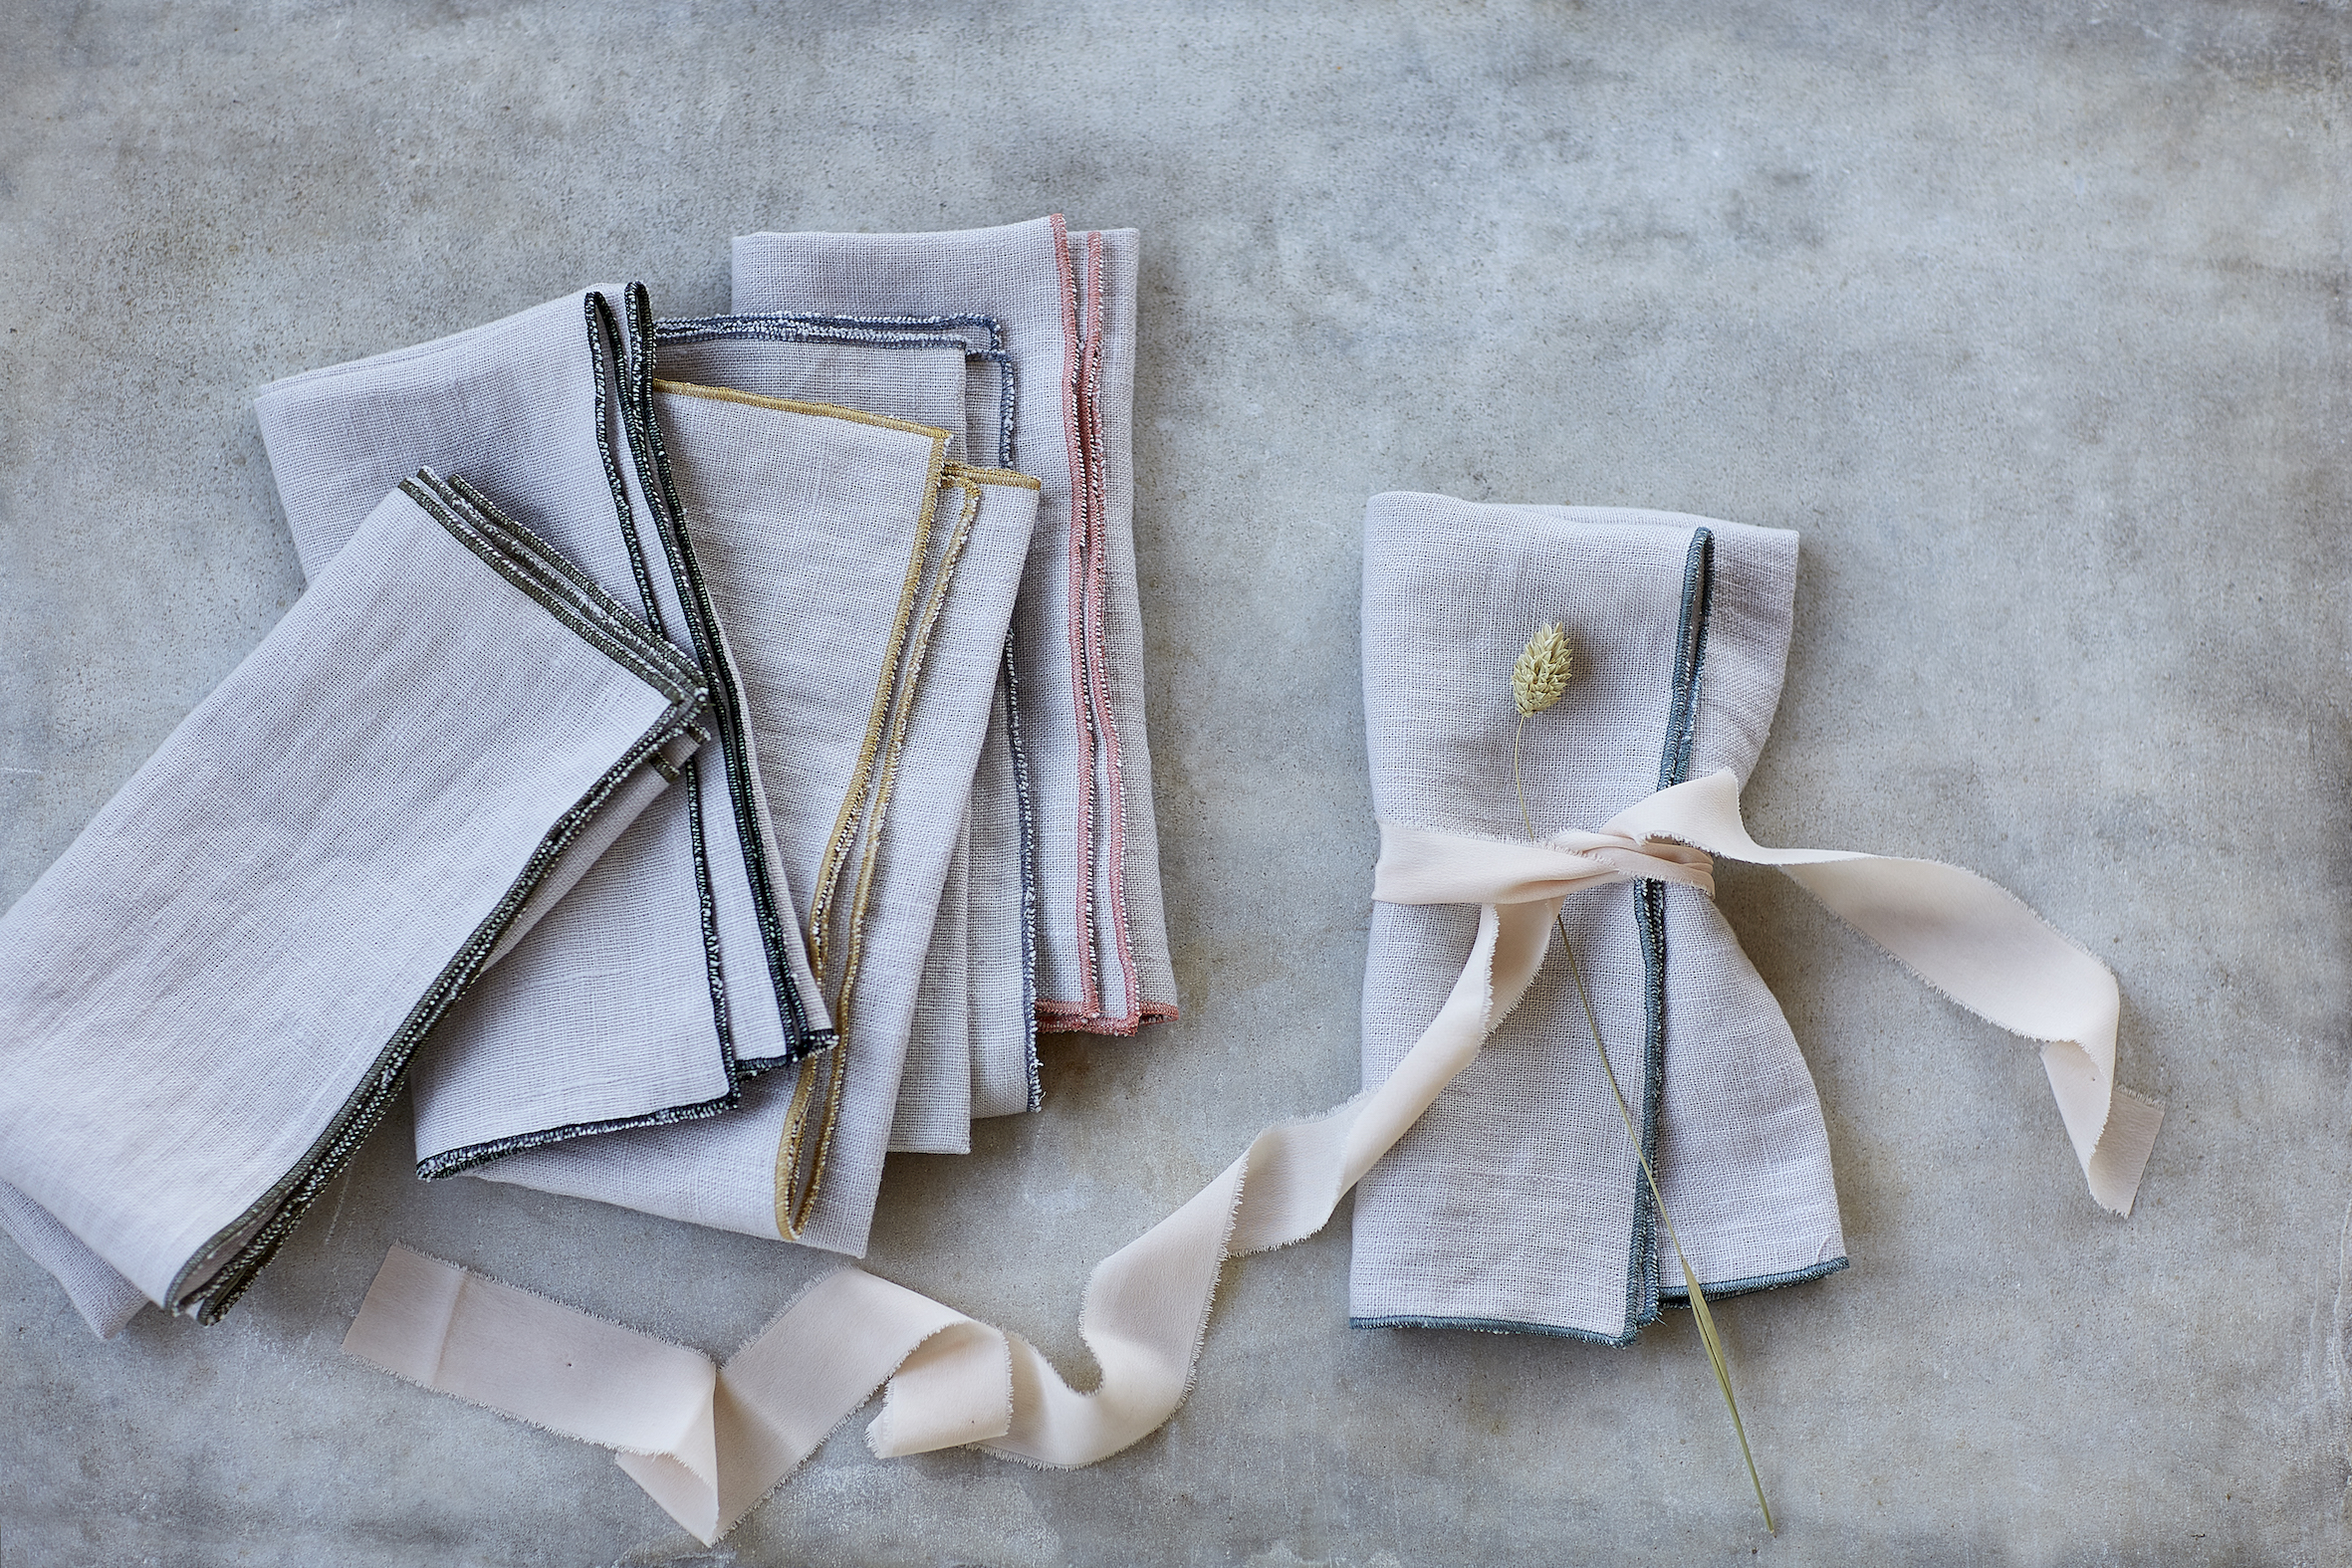 Linen napkins, photography by Kristin Perers